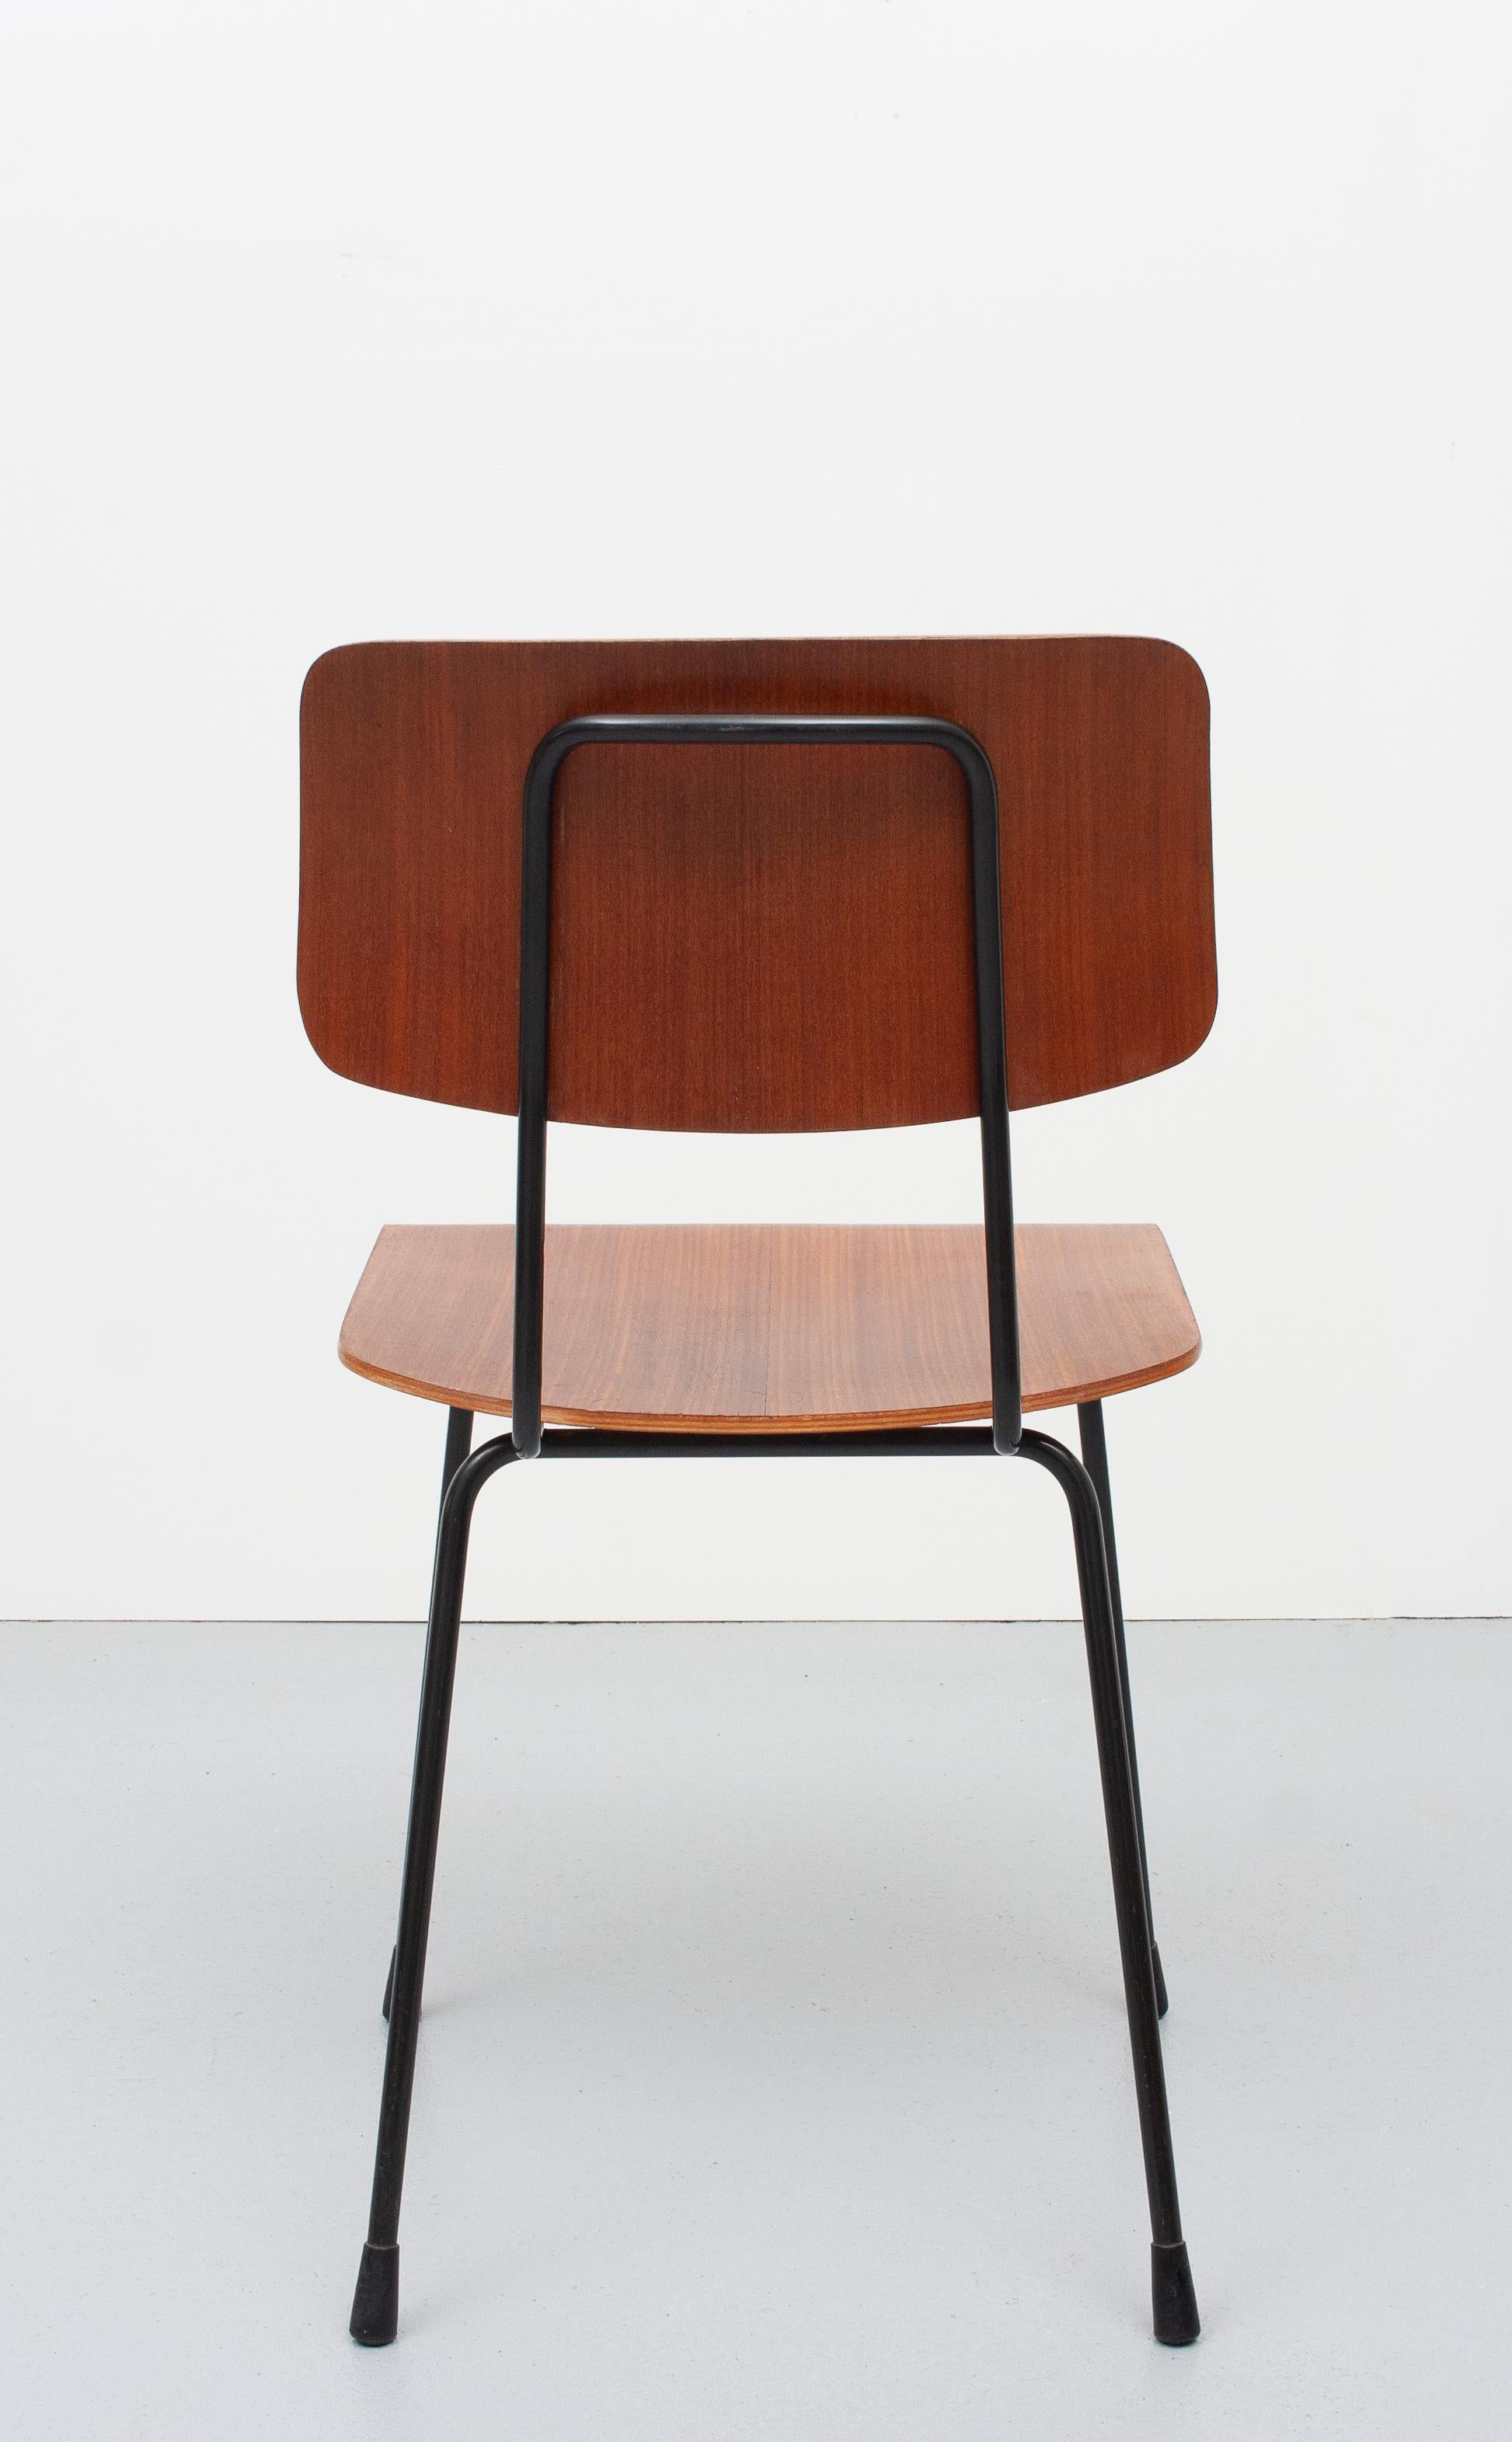 Mid-20th Century Teak Curved Plywood Chair Gispen Model 1262, 1950s, Holland